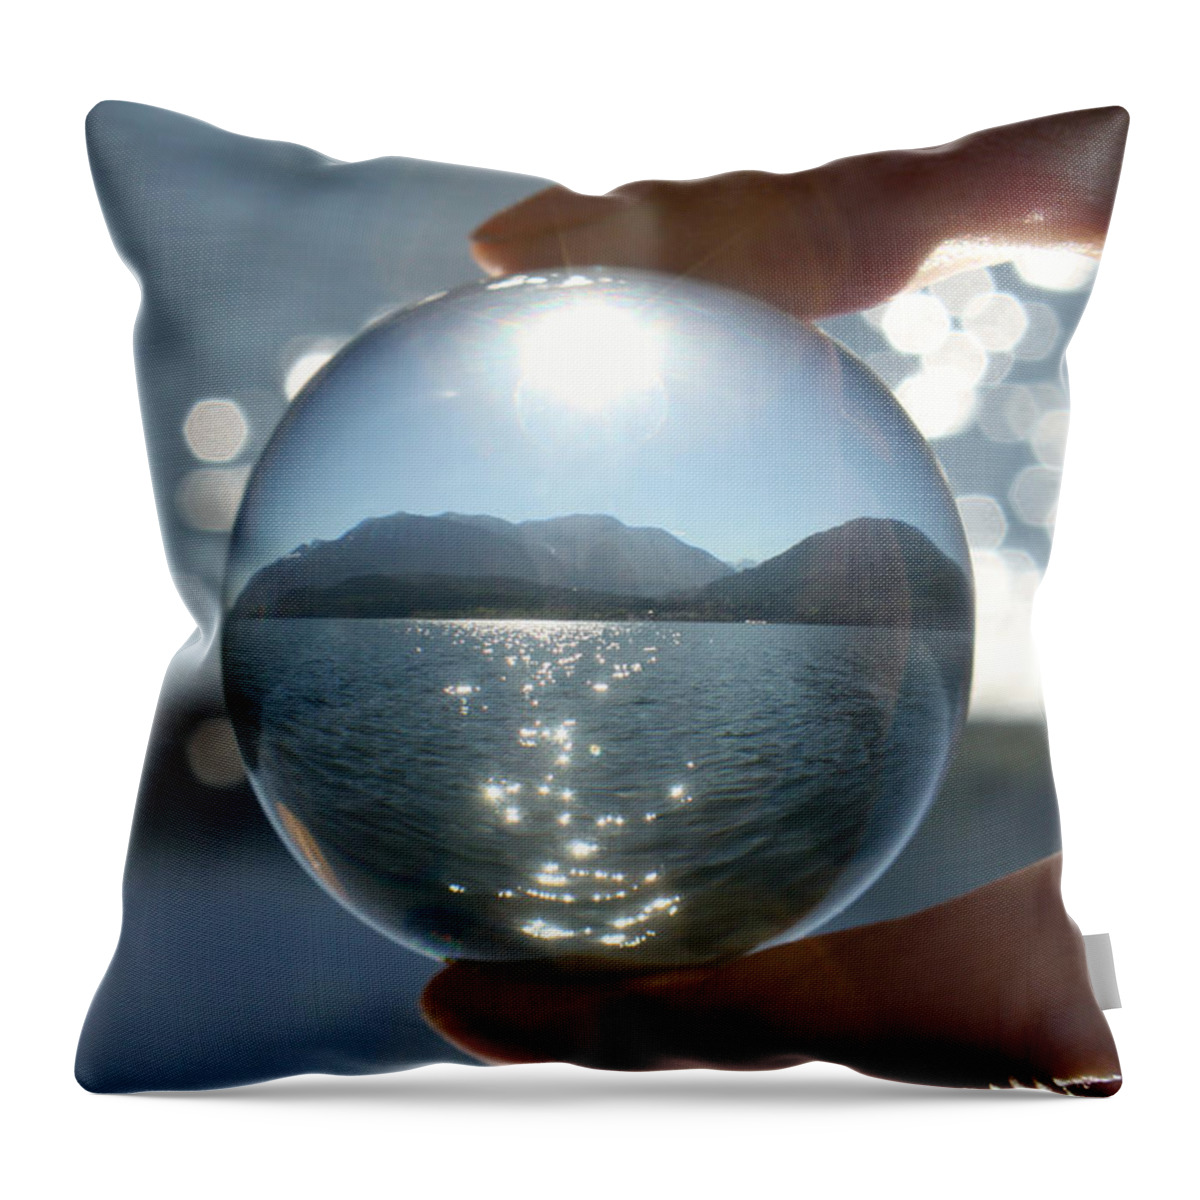 Sparkles Throw Pillow featuring the photograph Sparkles On The Water by Cathie Douglas